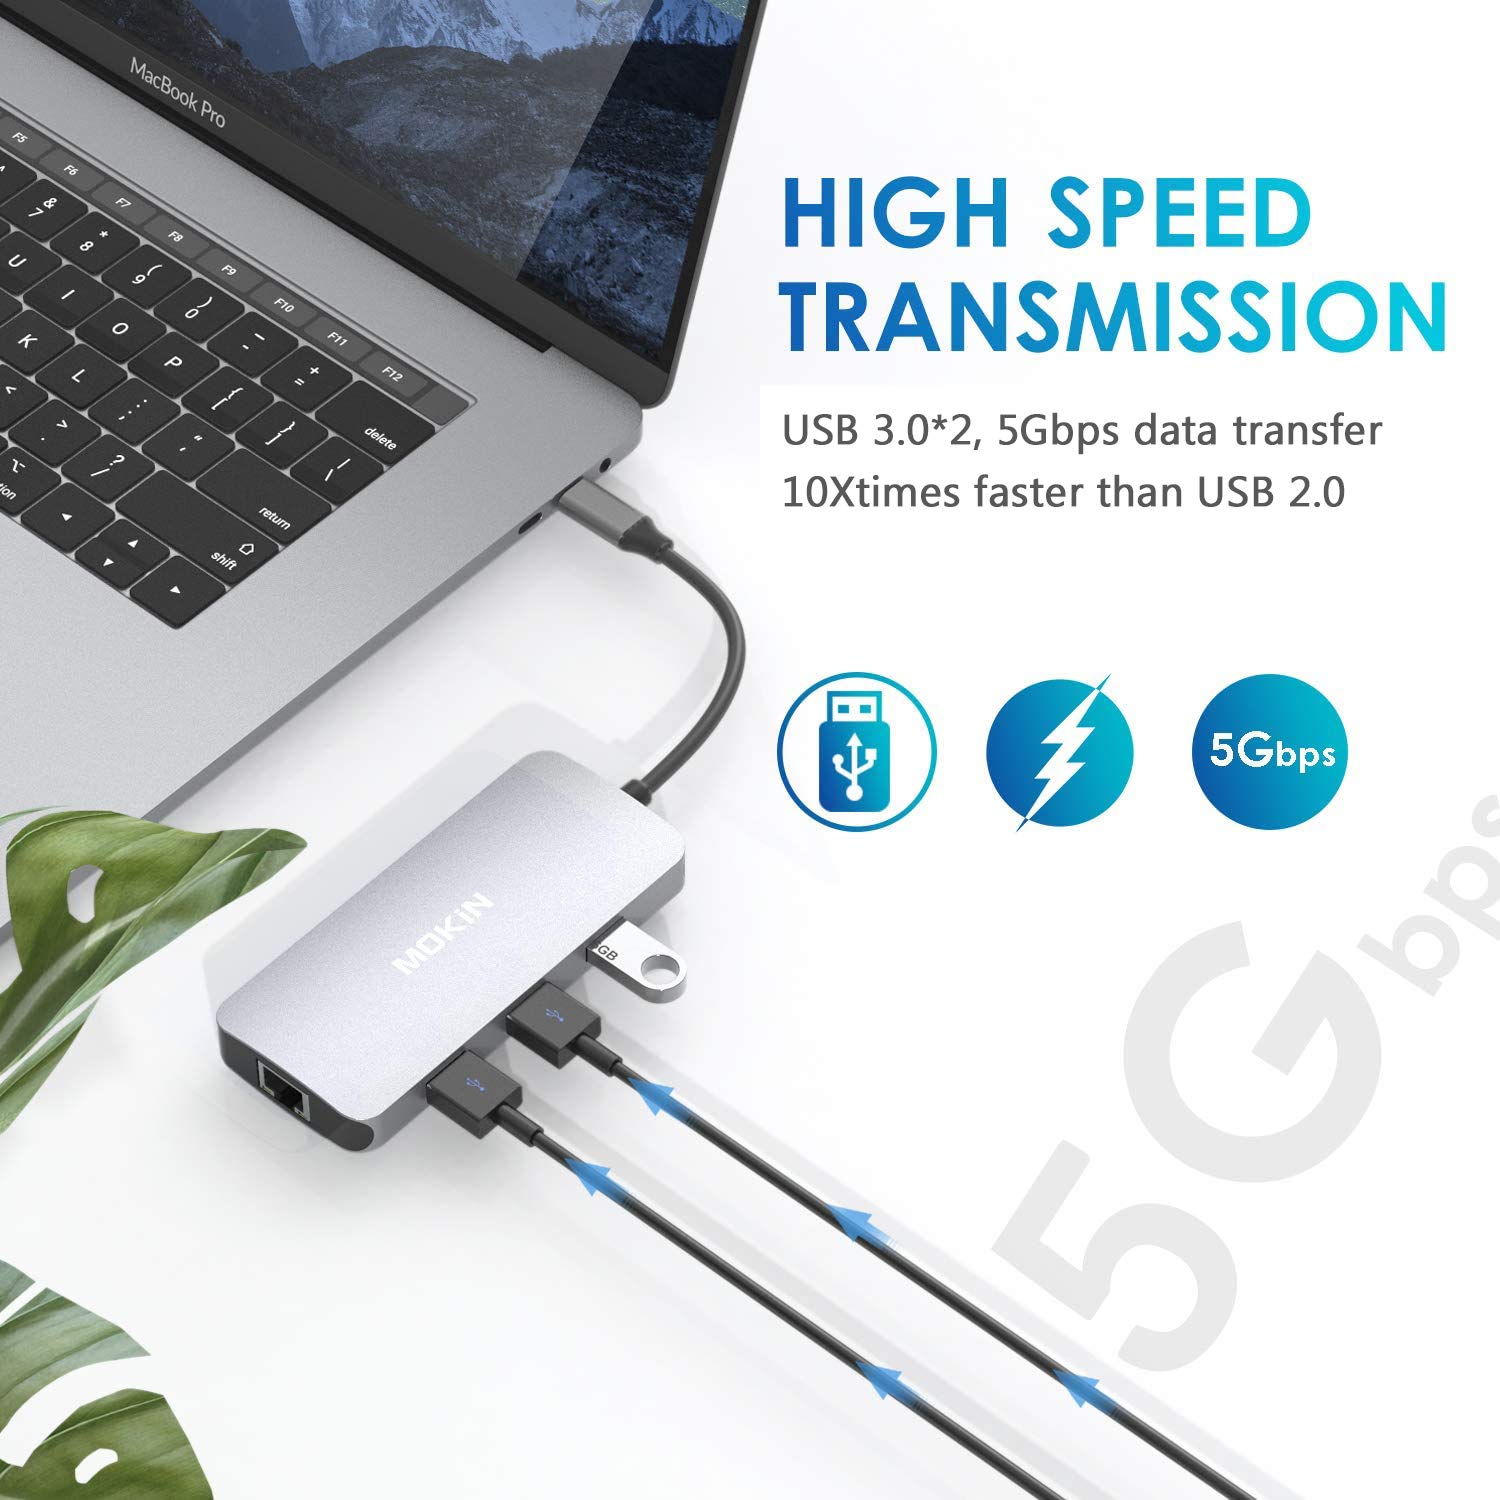 USB C Adapters for MacBook Pro/Air,Mac Dongle with 3 USB Port,USB C to HDMI, USB C to RJ45 Ethernet,MOKiN 9 in 1 100W Pd Charging, USB C to SD/TF Card Reader USB C Hub